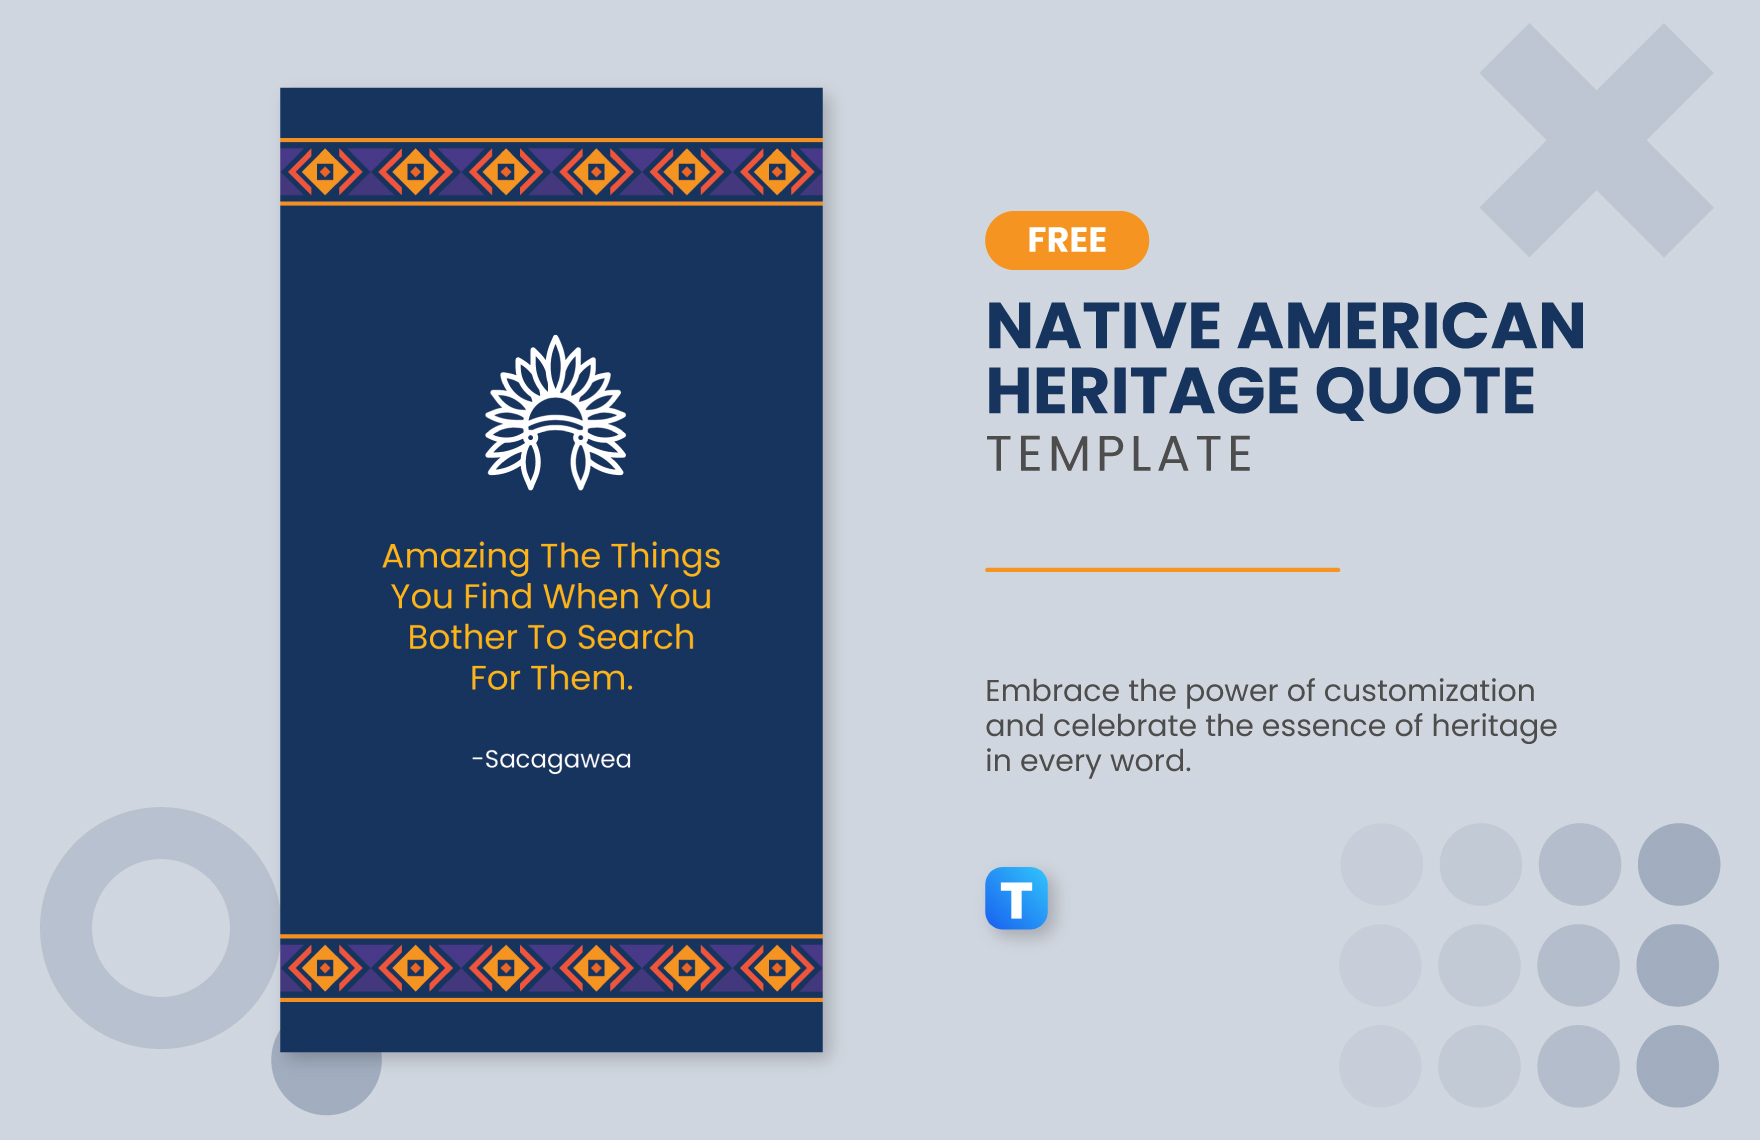 Native American Heritage Quote Template